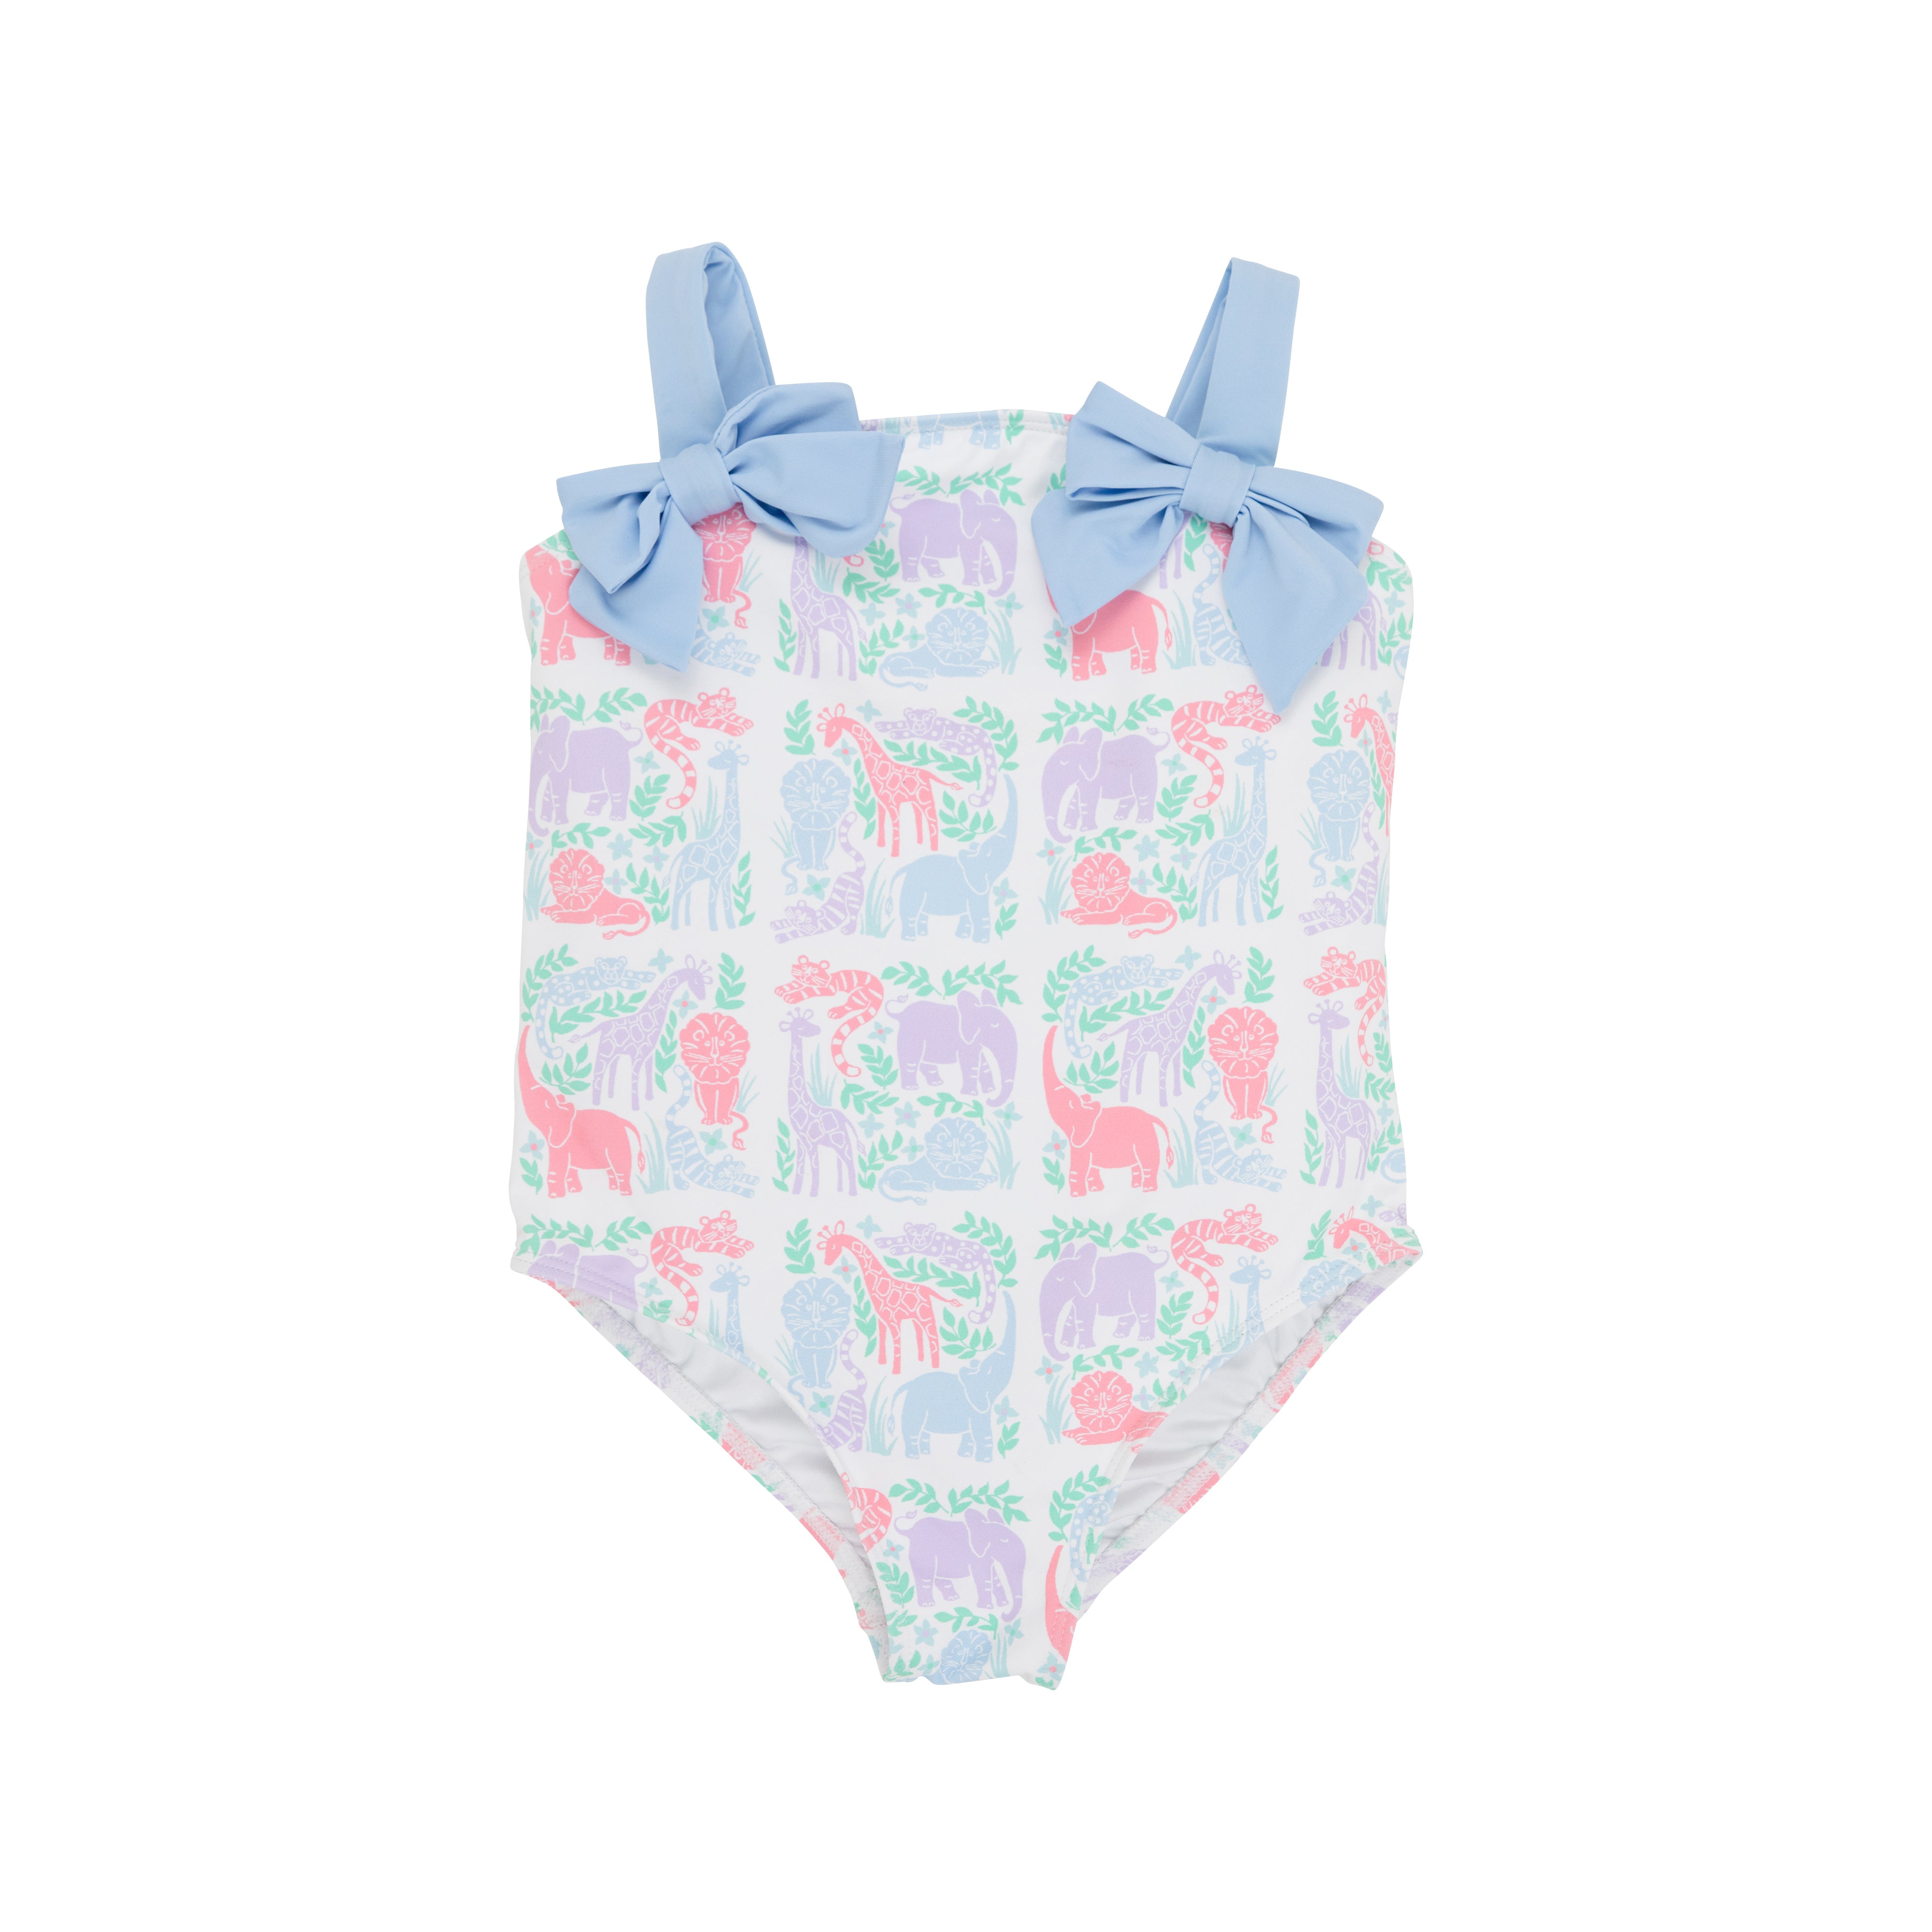 Shannon Bow Bathing Suit - Two By Two Hurrah Hurrah with Beale Street ...